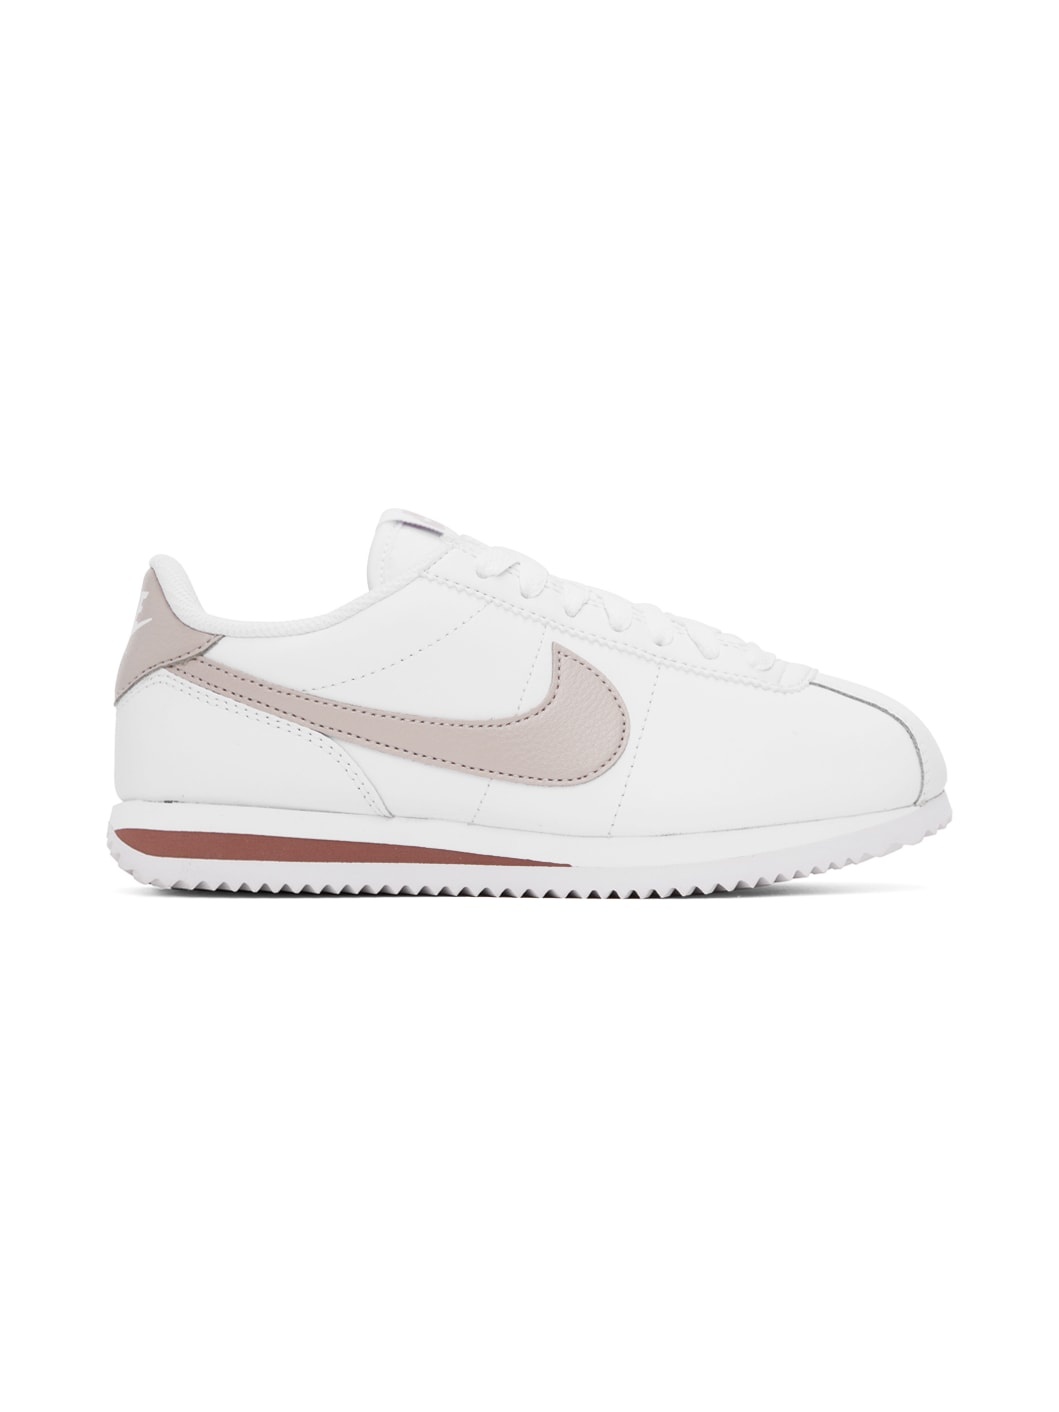 White & Pink Cortez Sneakers - 1